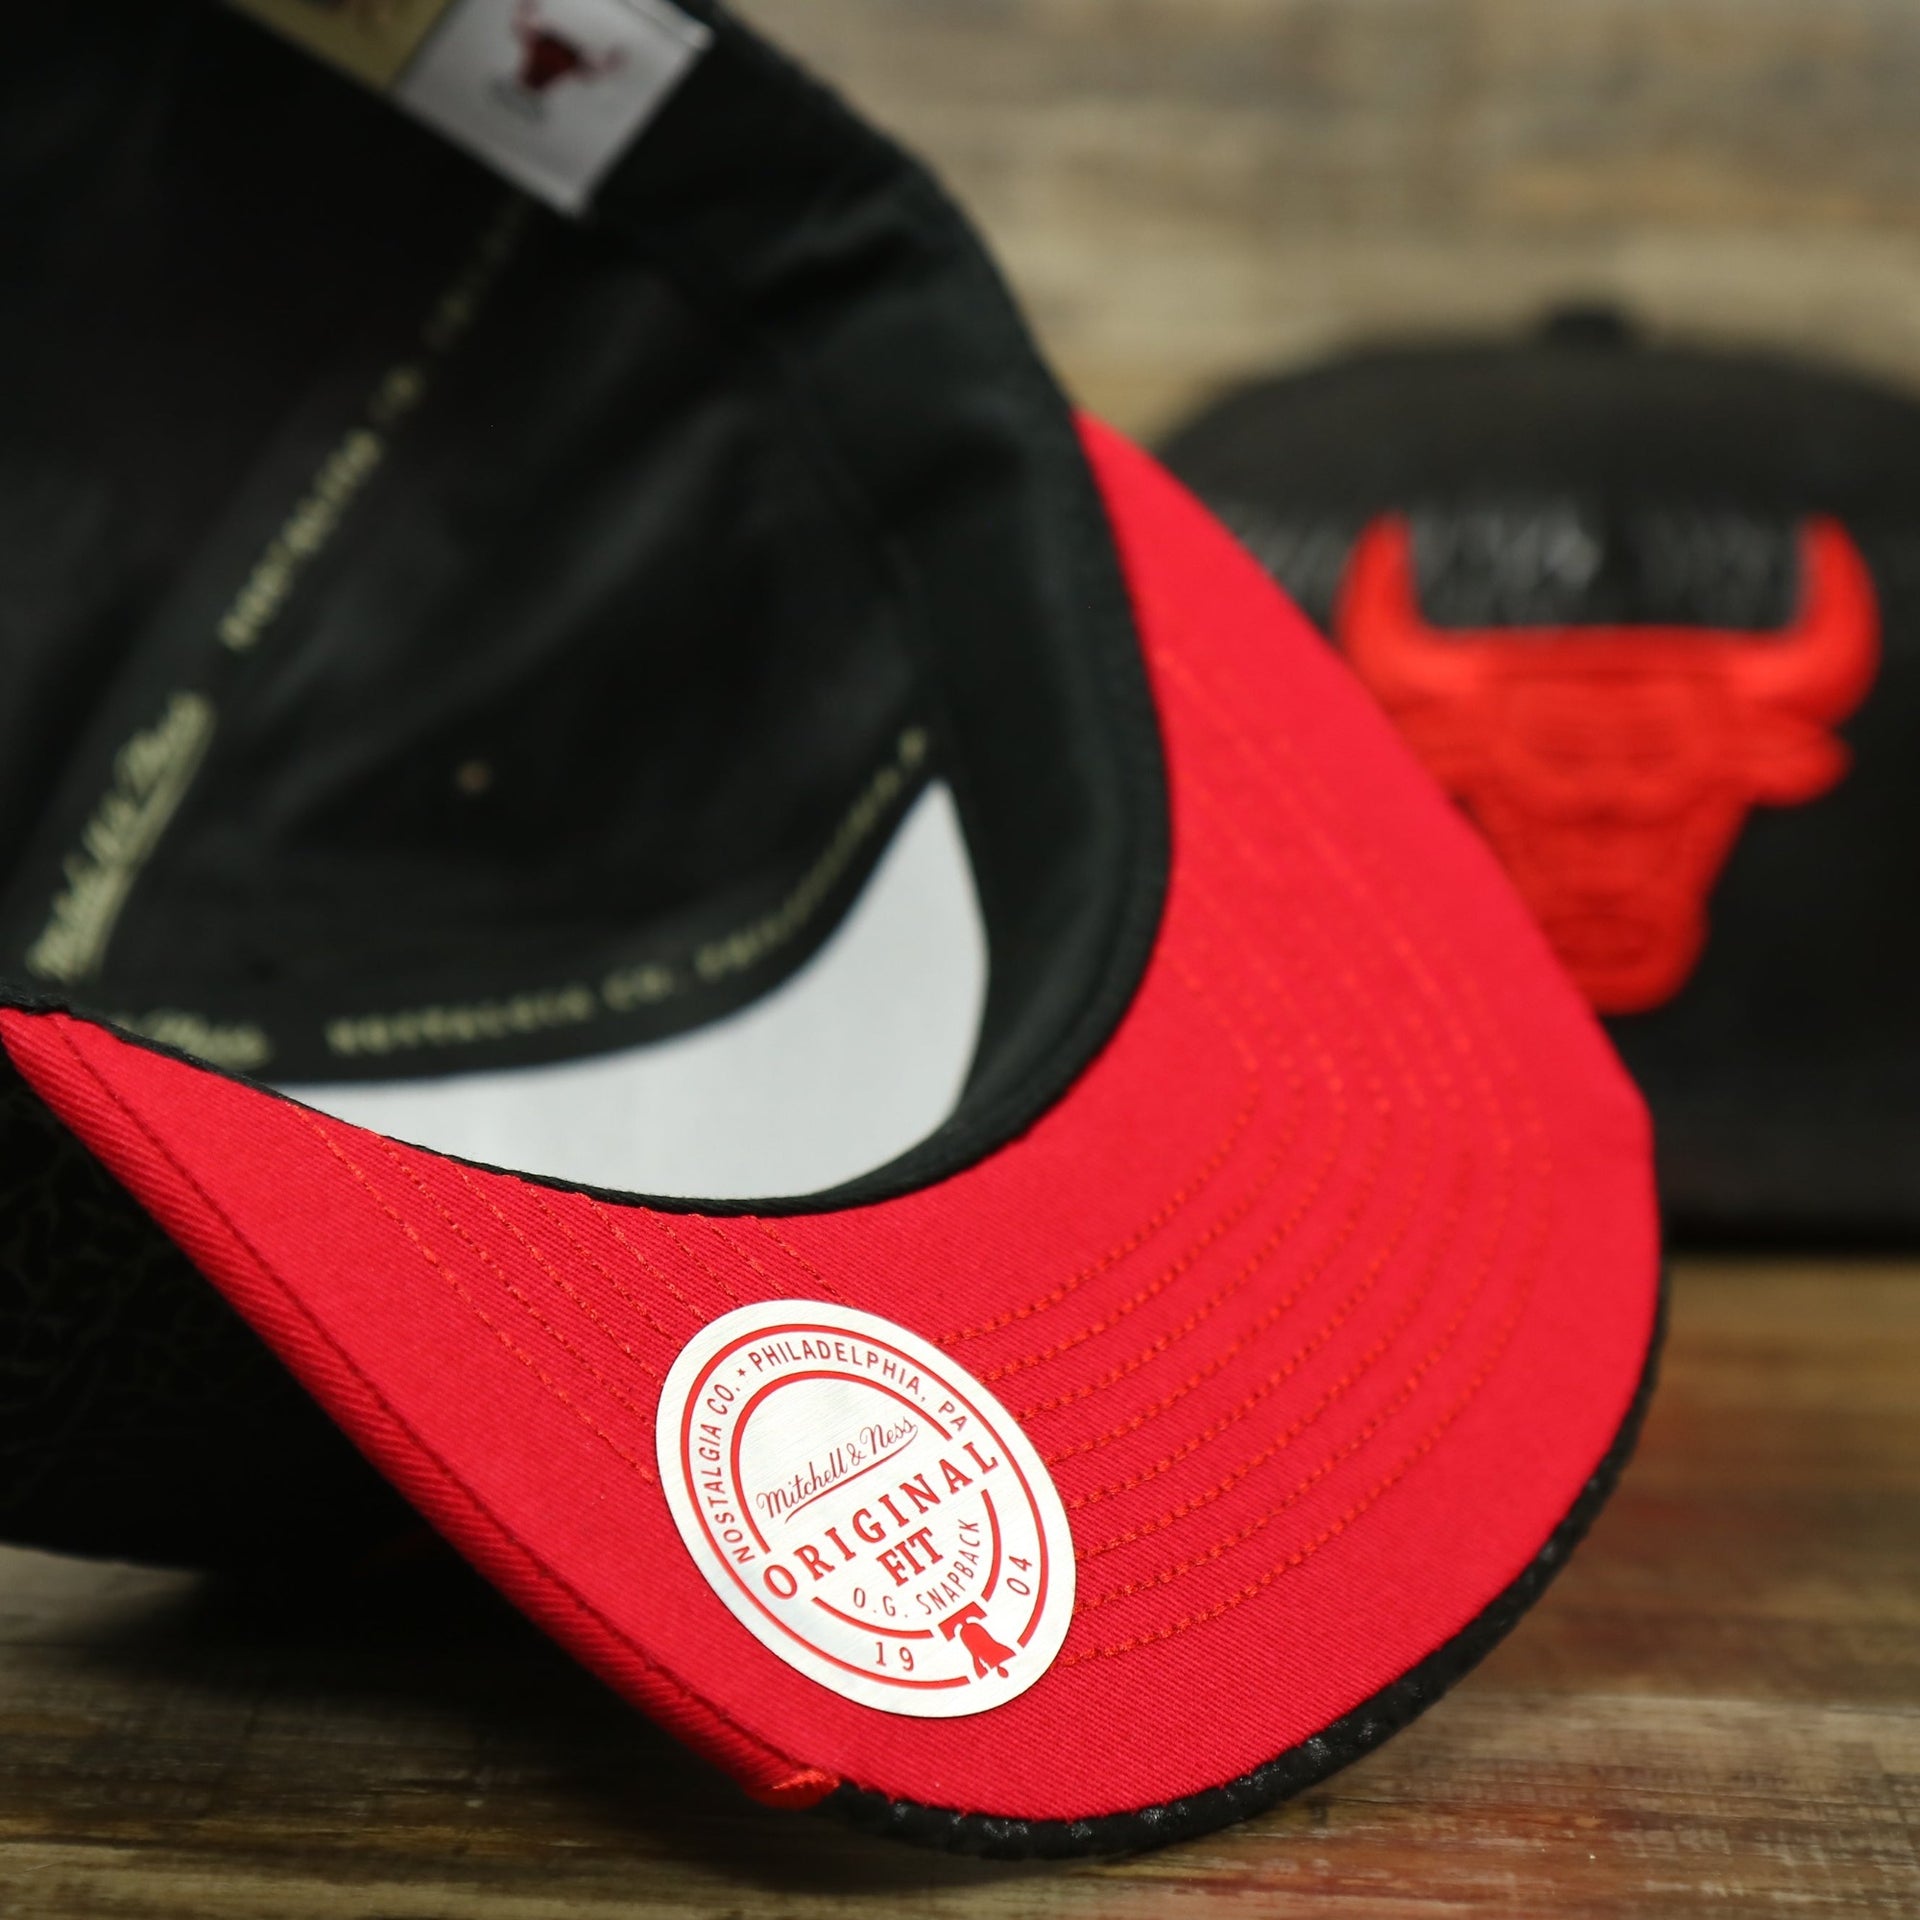 Red under visor of the Chicago Bulls “NBA Day 5” Satin Bred 5s Matching Snapback Hat | Snapback to match Satin Bred 5s